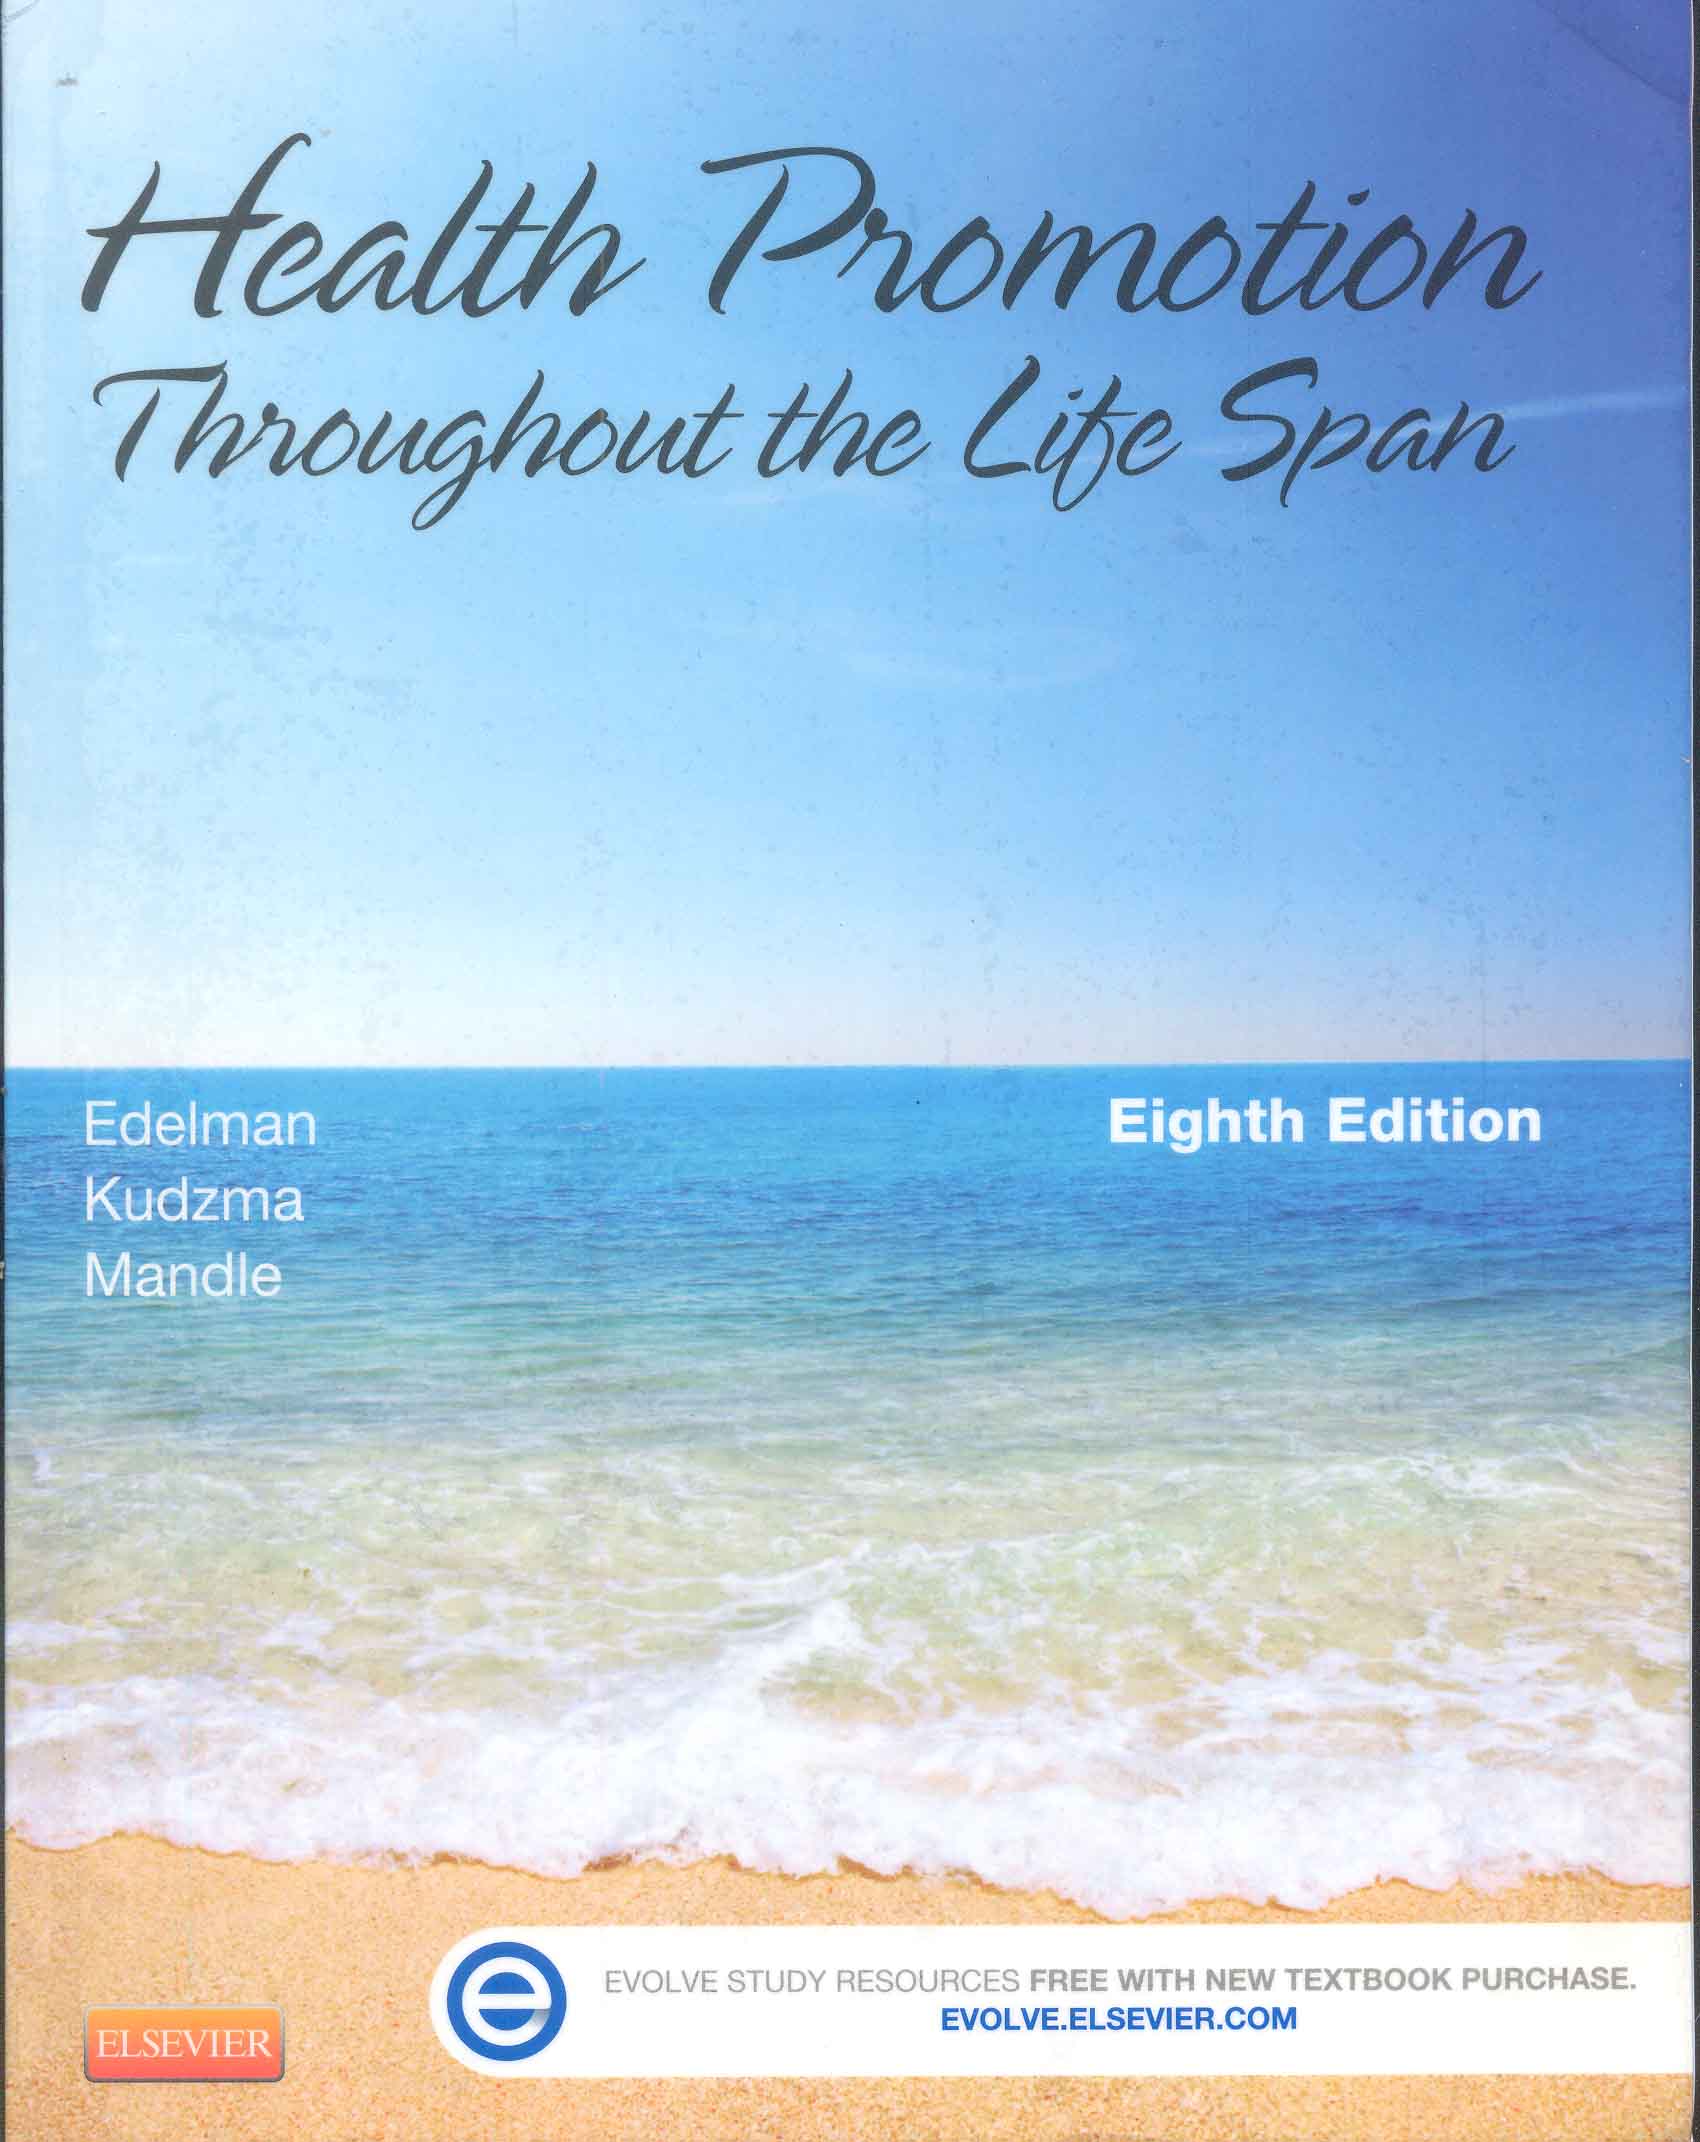 Health promotion throughout the life span